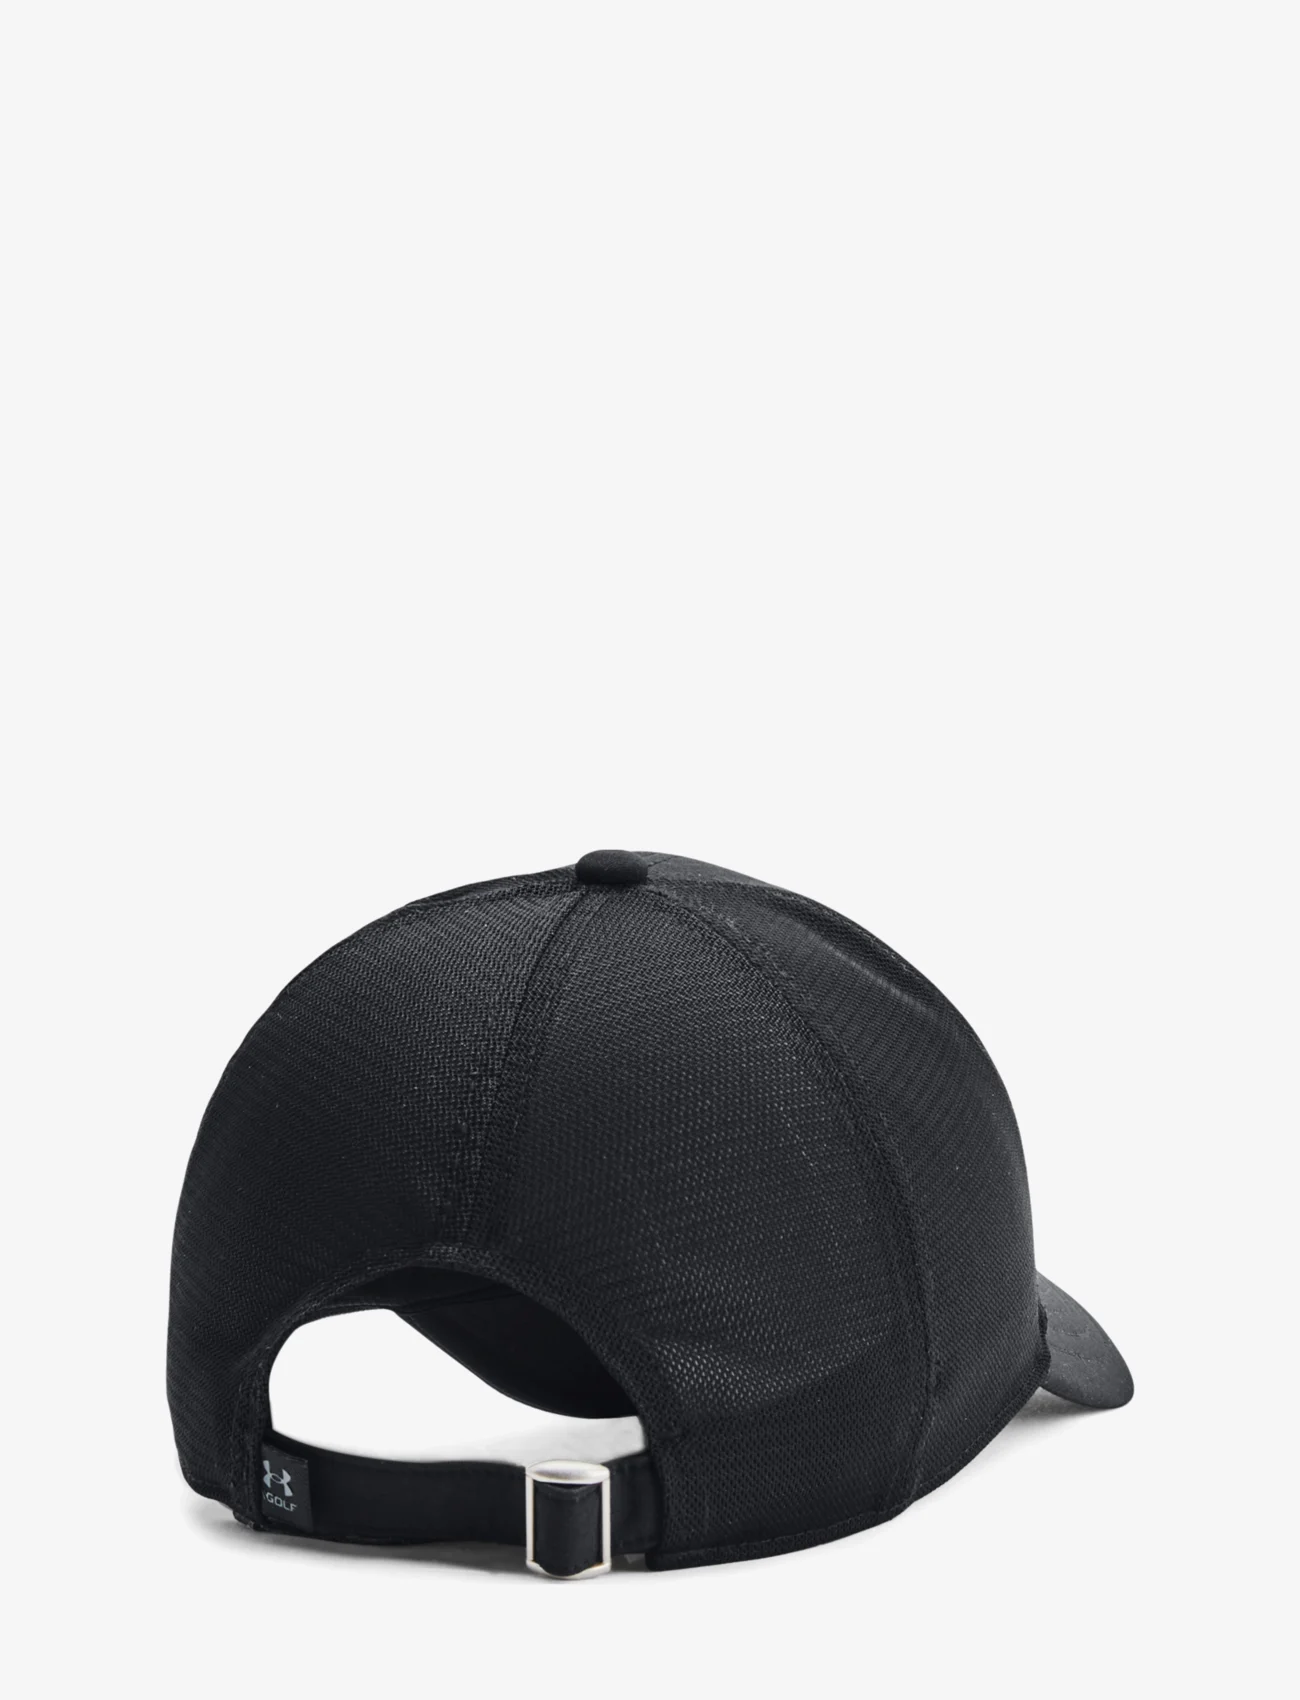 Under Armour - Iso-chill Driver Mesh Adj - black - 1